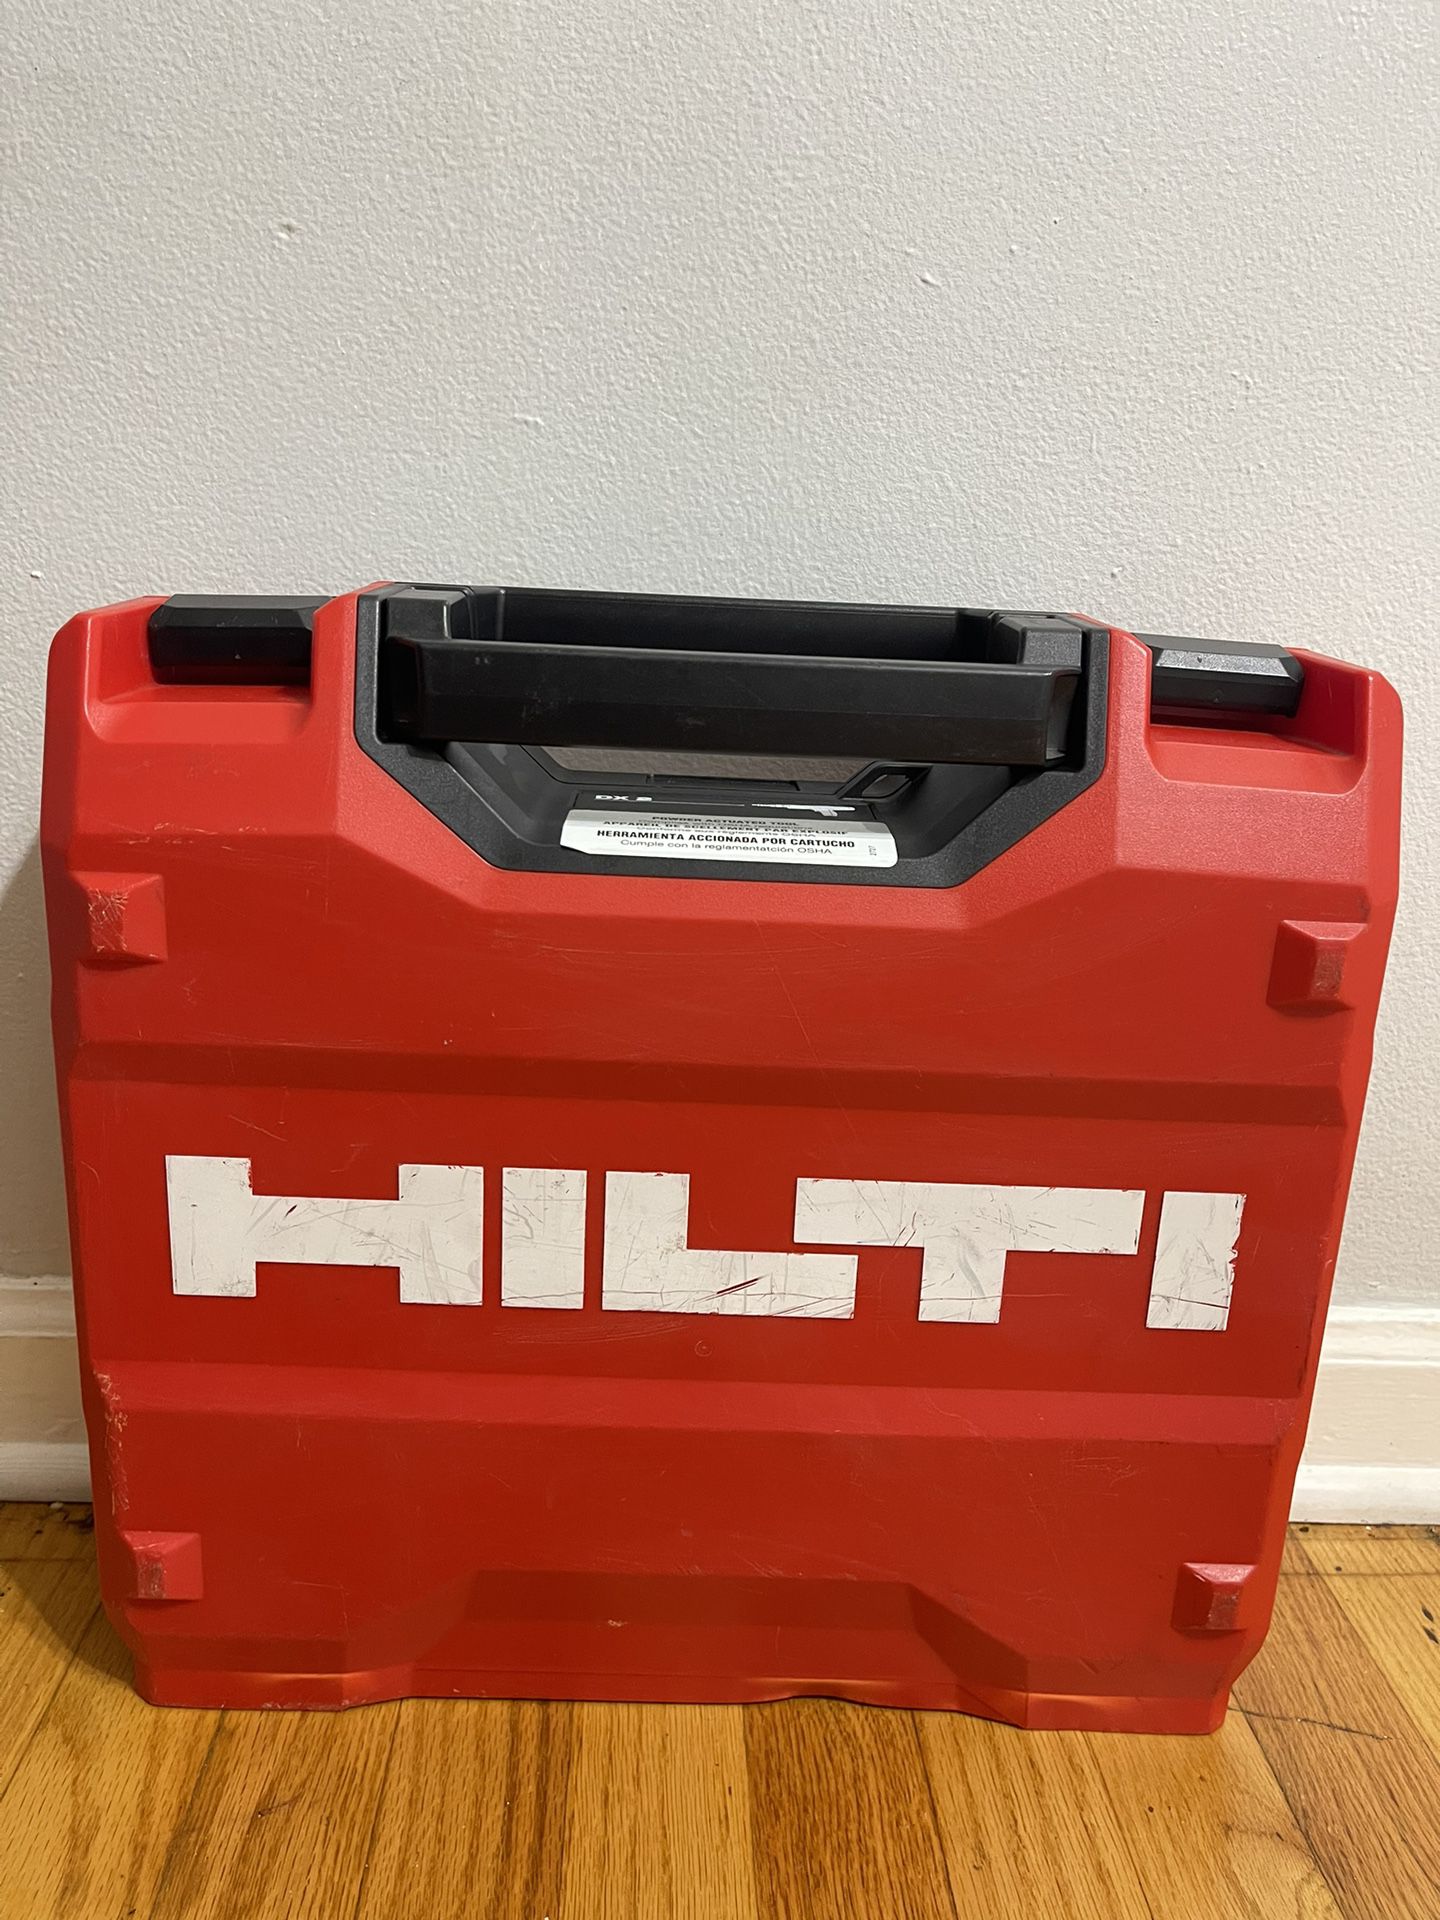 Hilti DX 2 Powder Actuated Fastening Tool Drywall Track Fastening Concrete Tool